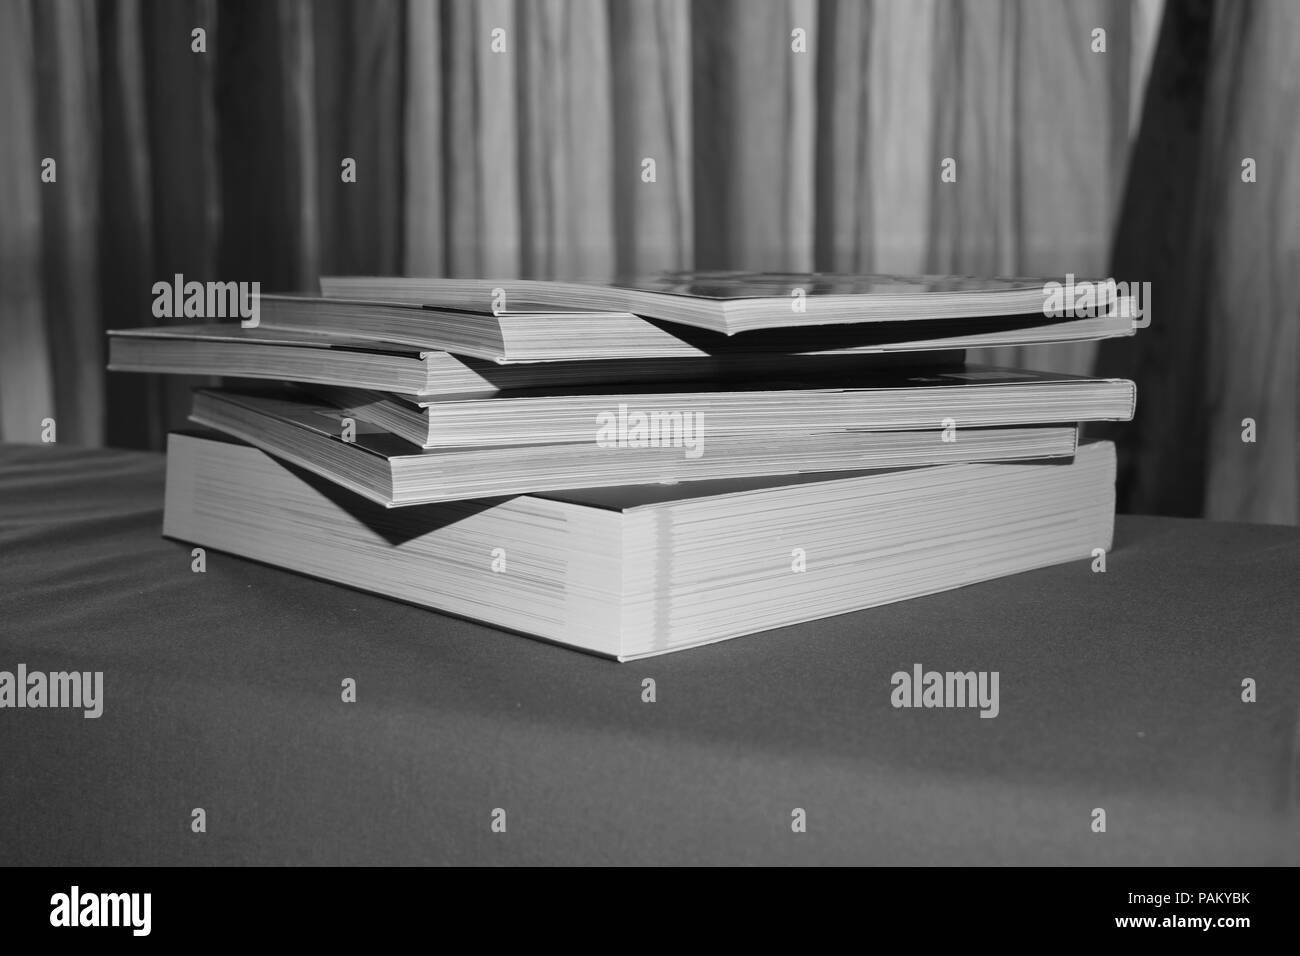 books on a table in black and white Stock Photo